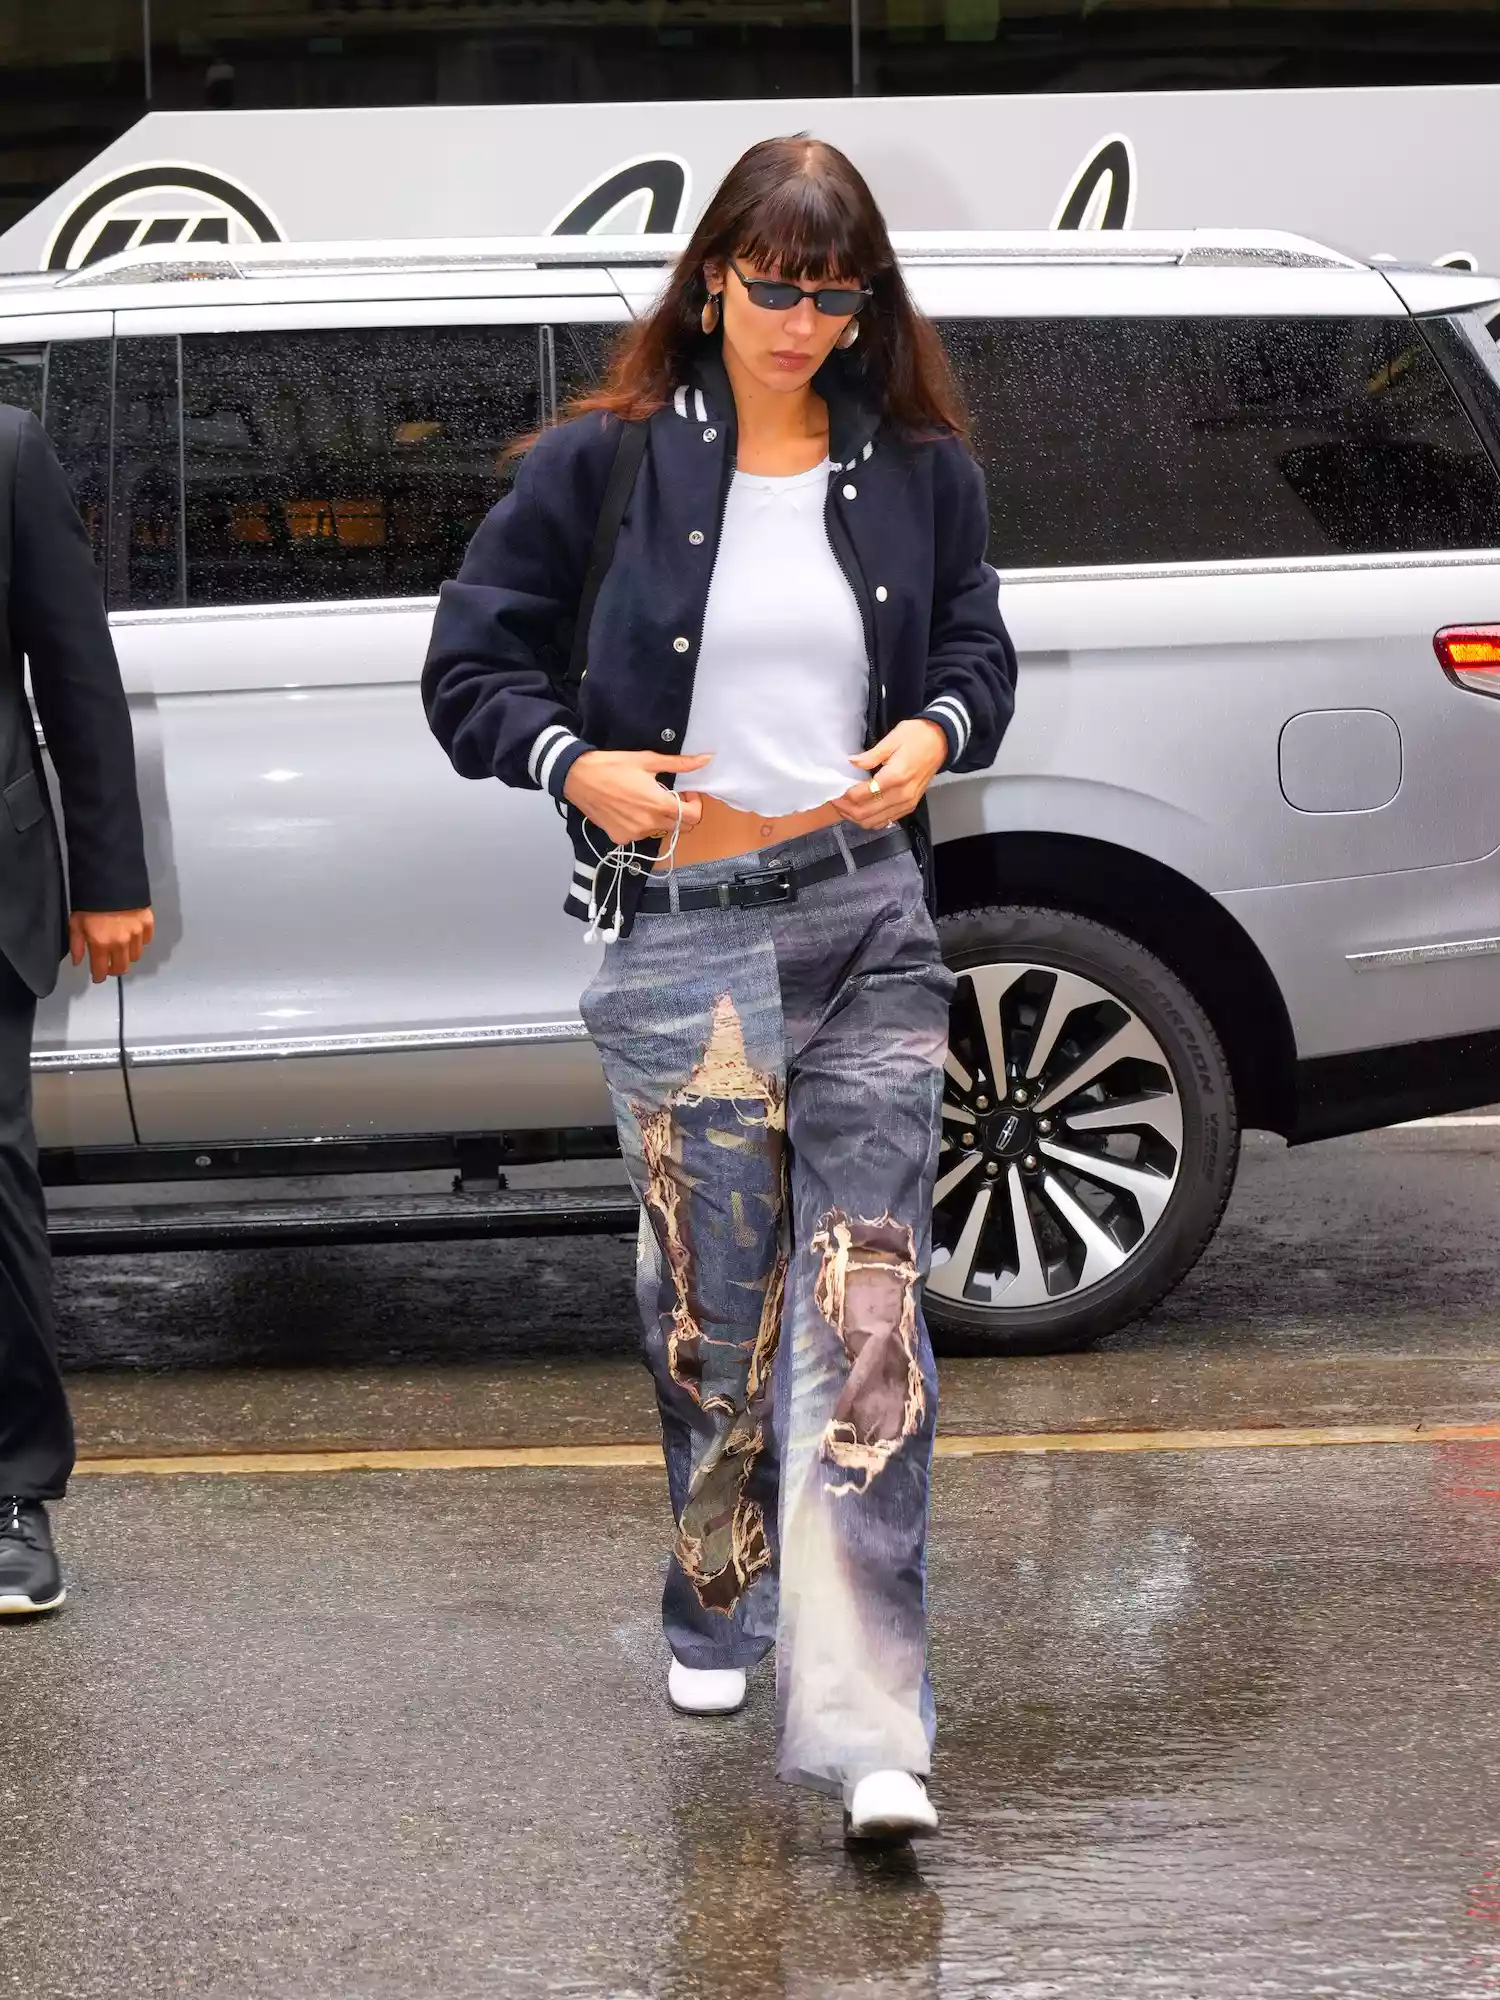 Bella Hadid wears a varsity jacket, white t-shirt, and ripped jeans